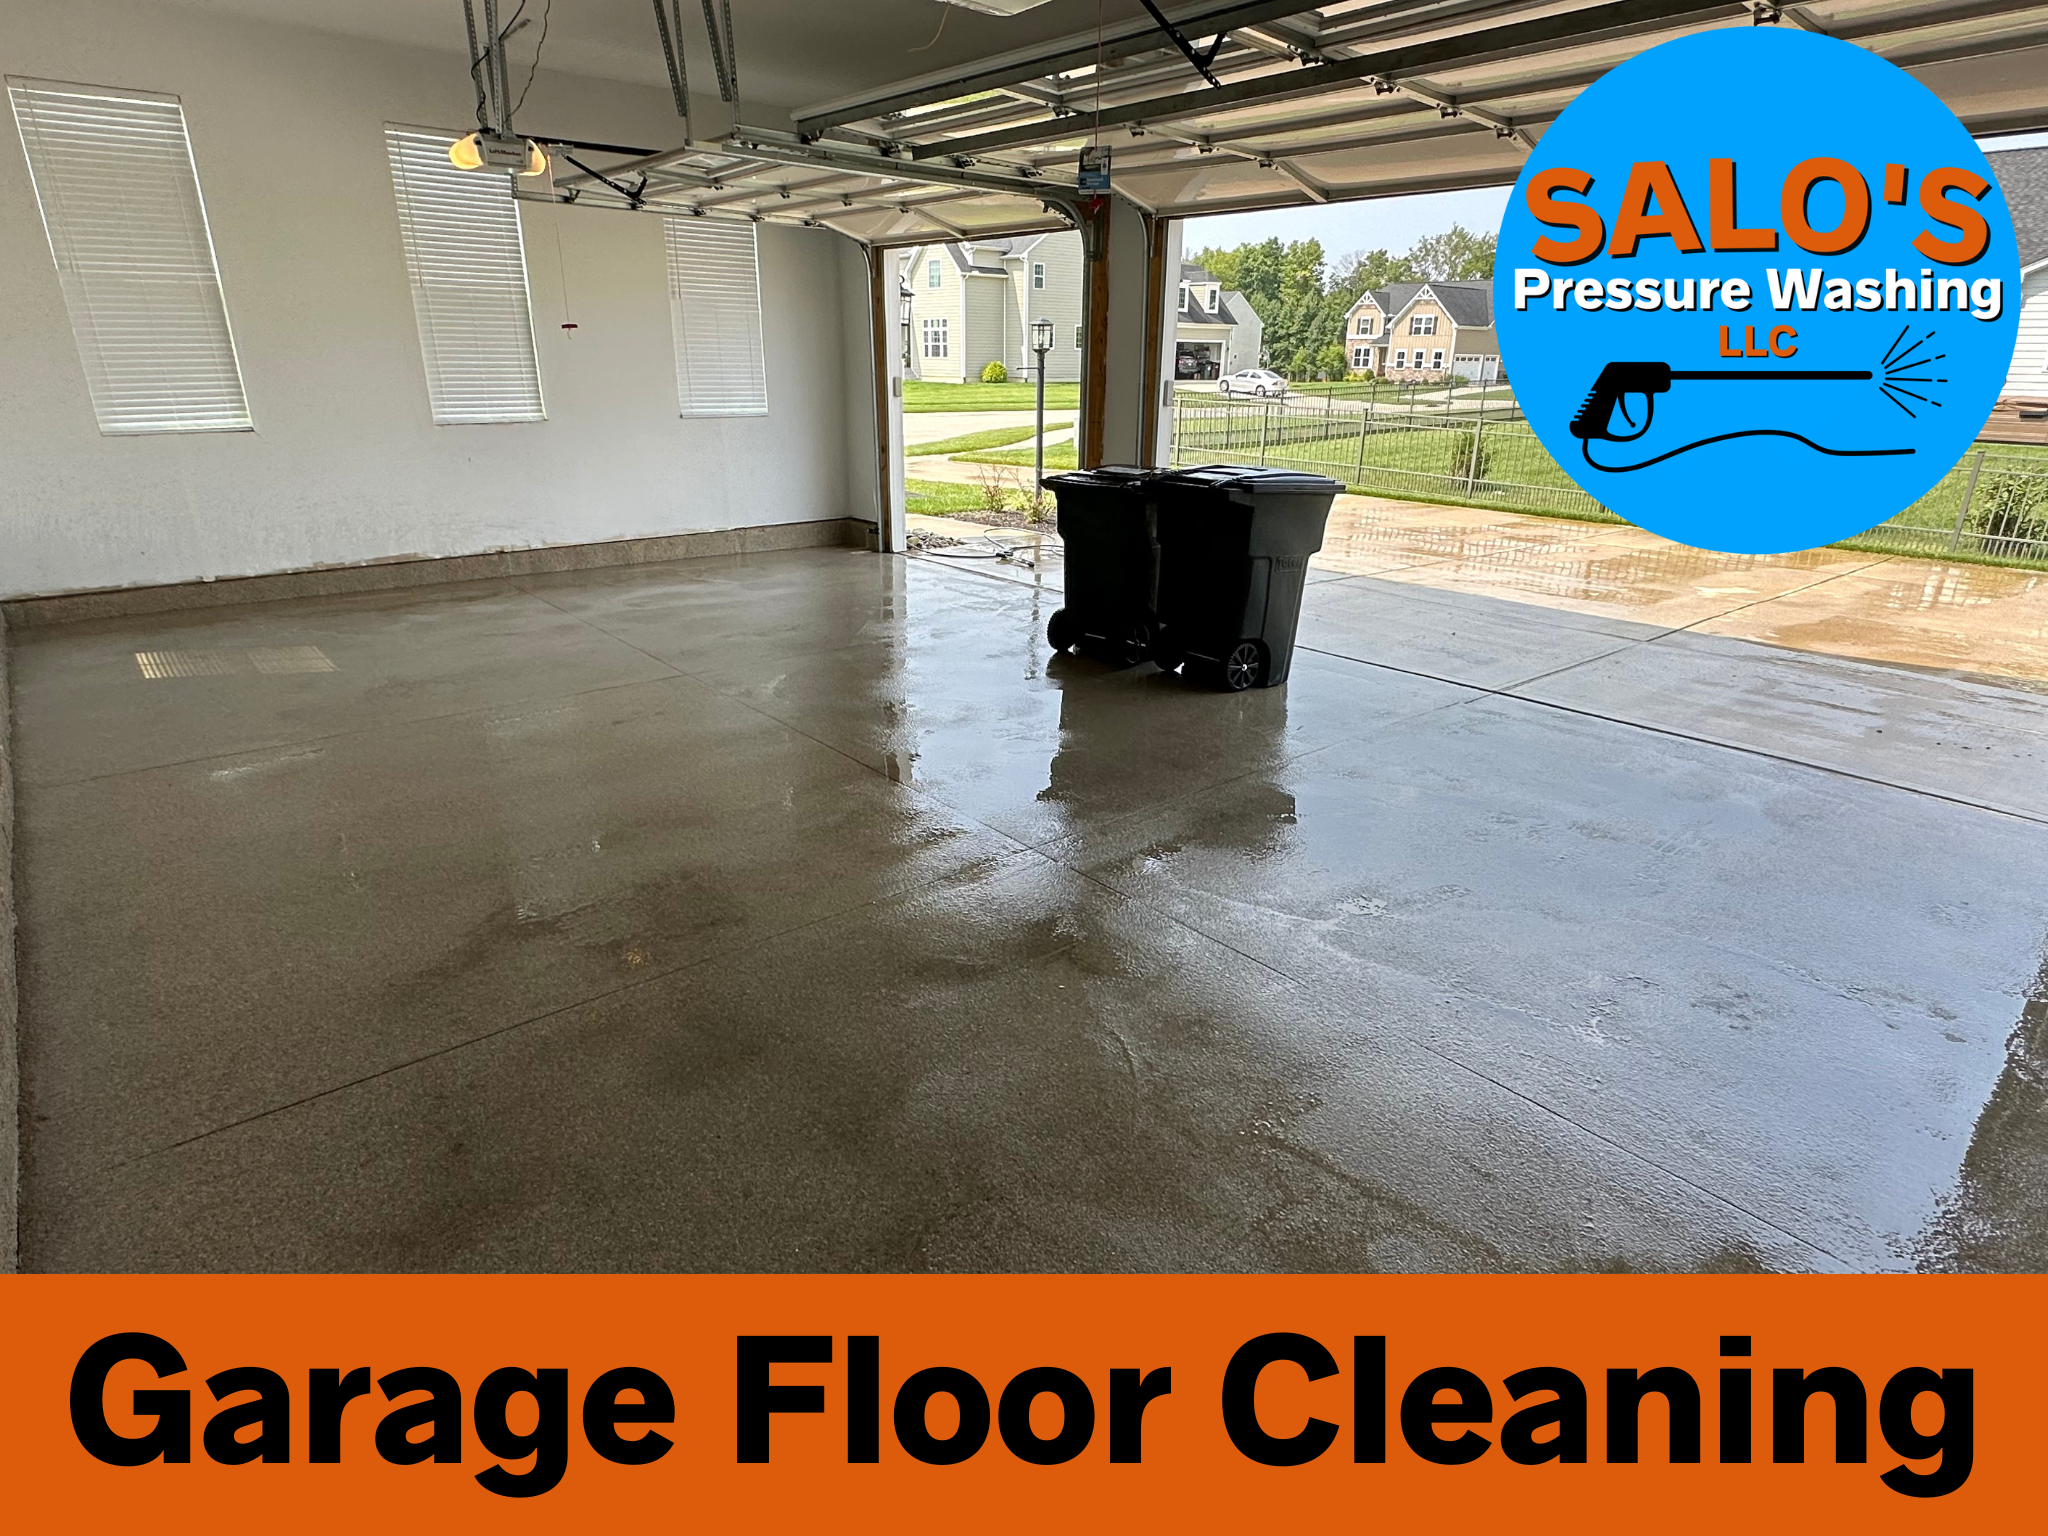 Professional Garage Floor Cleaning in Bellbrook, Oh